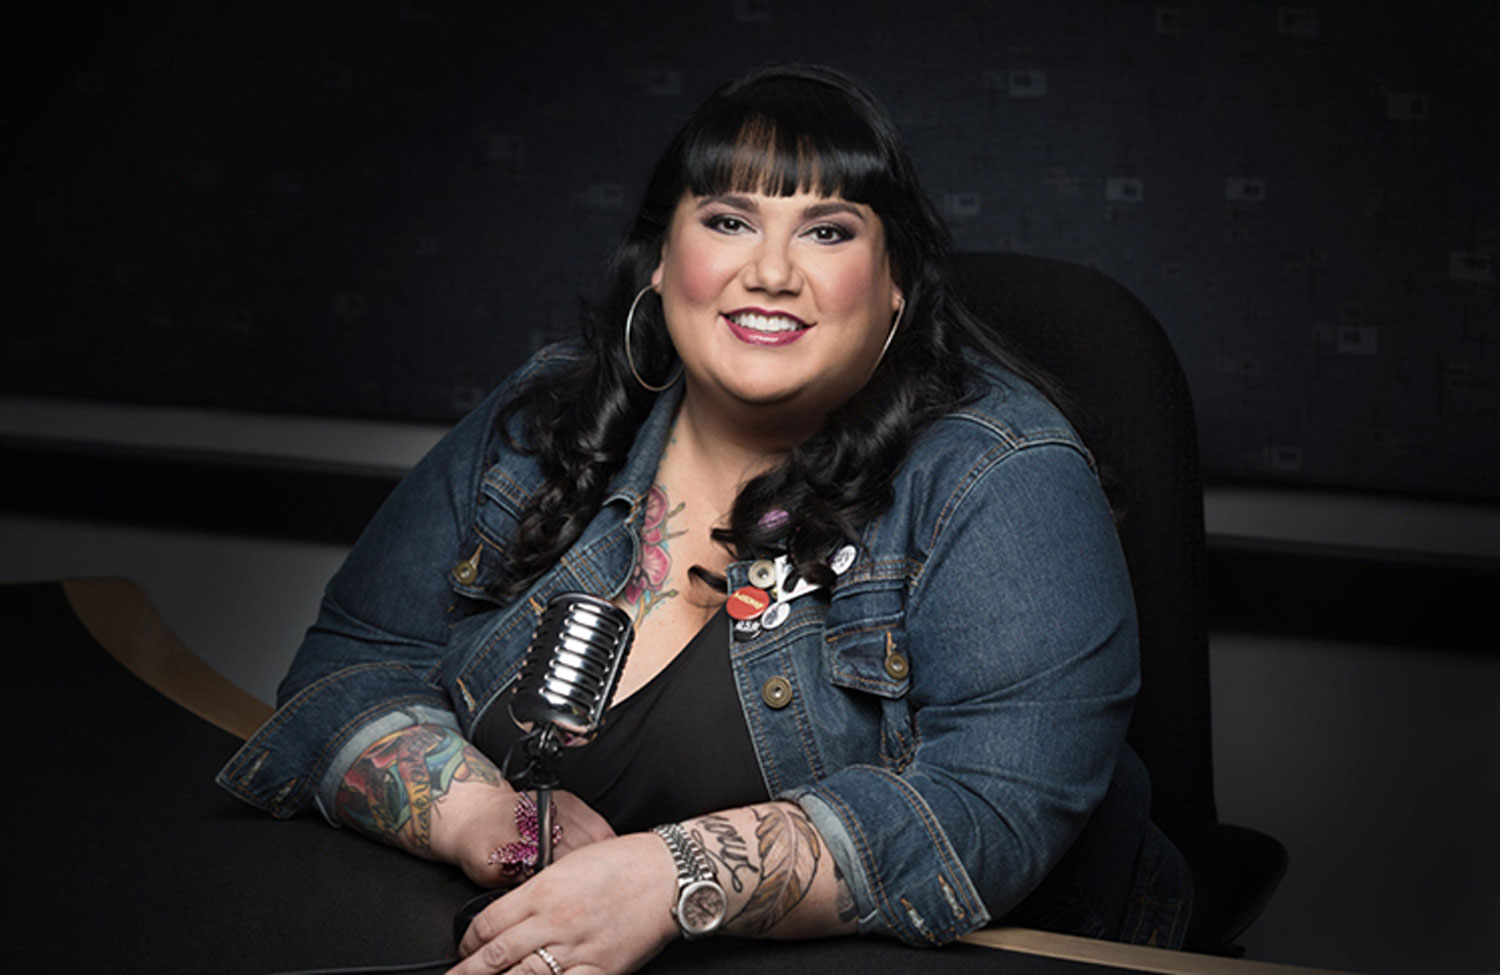 Comedian Candy Palmater and Toronto Raptor’s In-Arena Host Mark Strong Emcee 12th Annual Indigenous Youth Dance Shows Presented by Outside Looking In